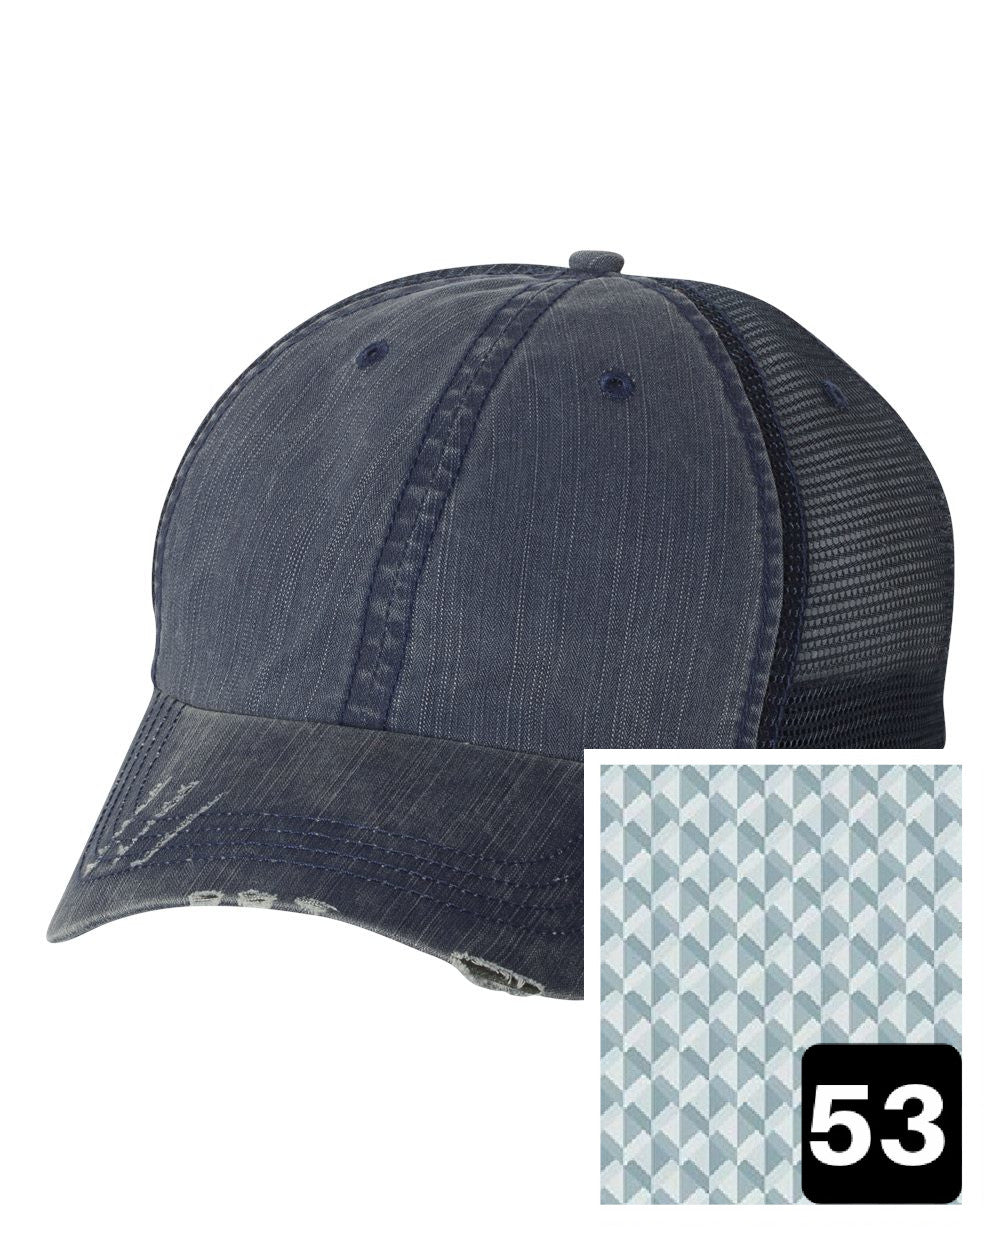 Rhode Island Hat | Navy Distressed Trucker Cap | Many Fabric Choices